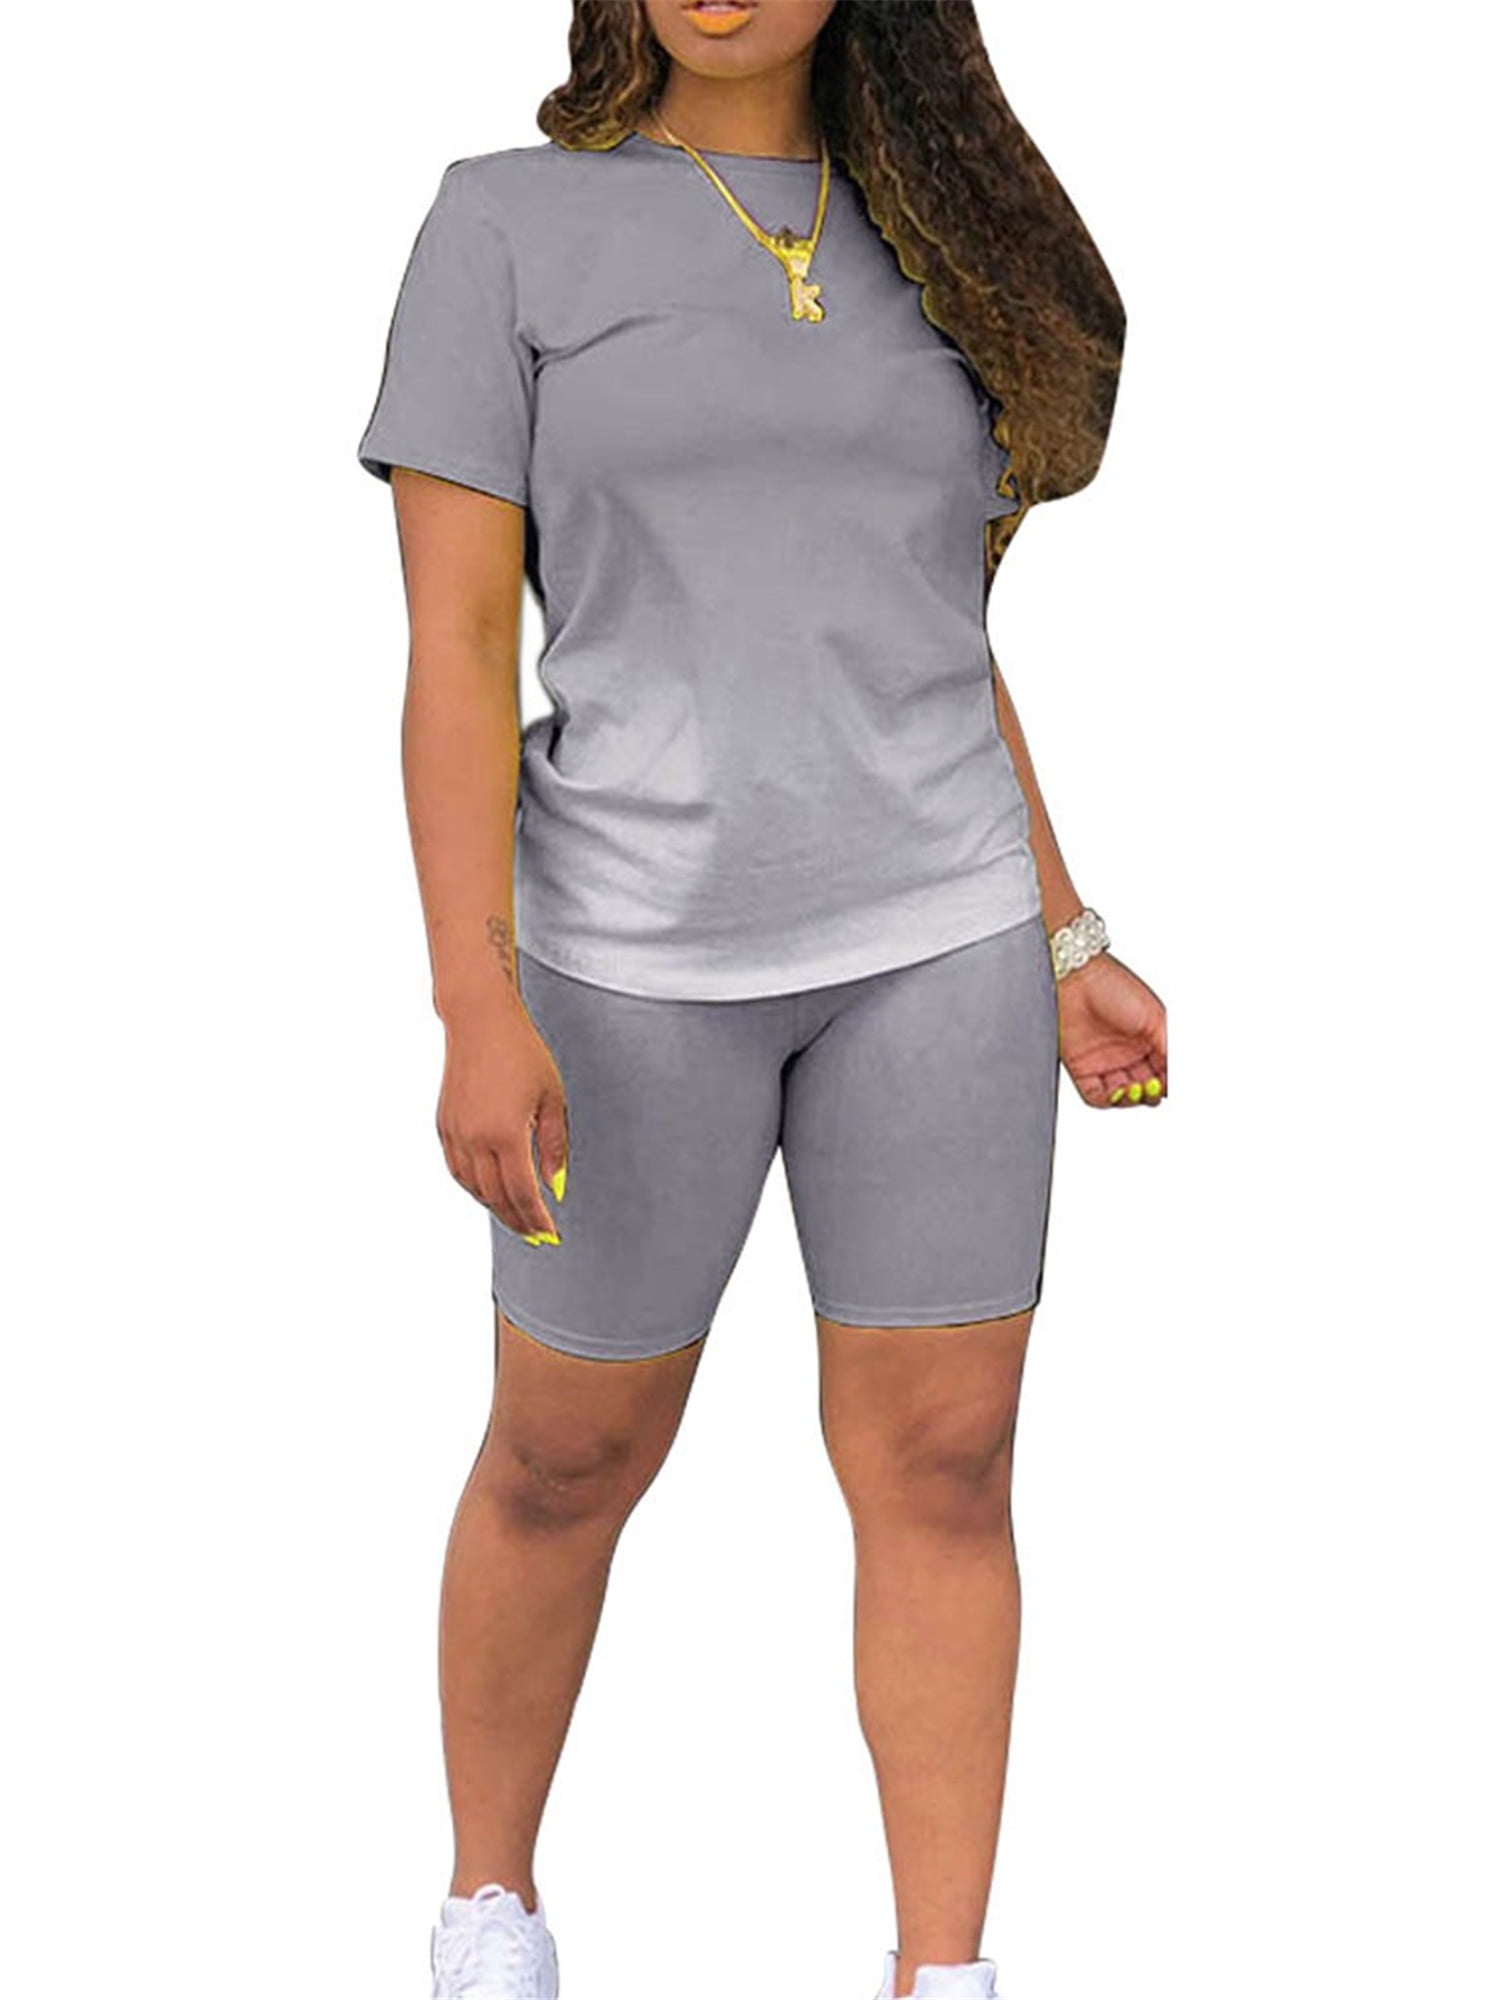 Gray Summer Outfit, Workout Set, Gray Shorts, Plus Size Clothing